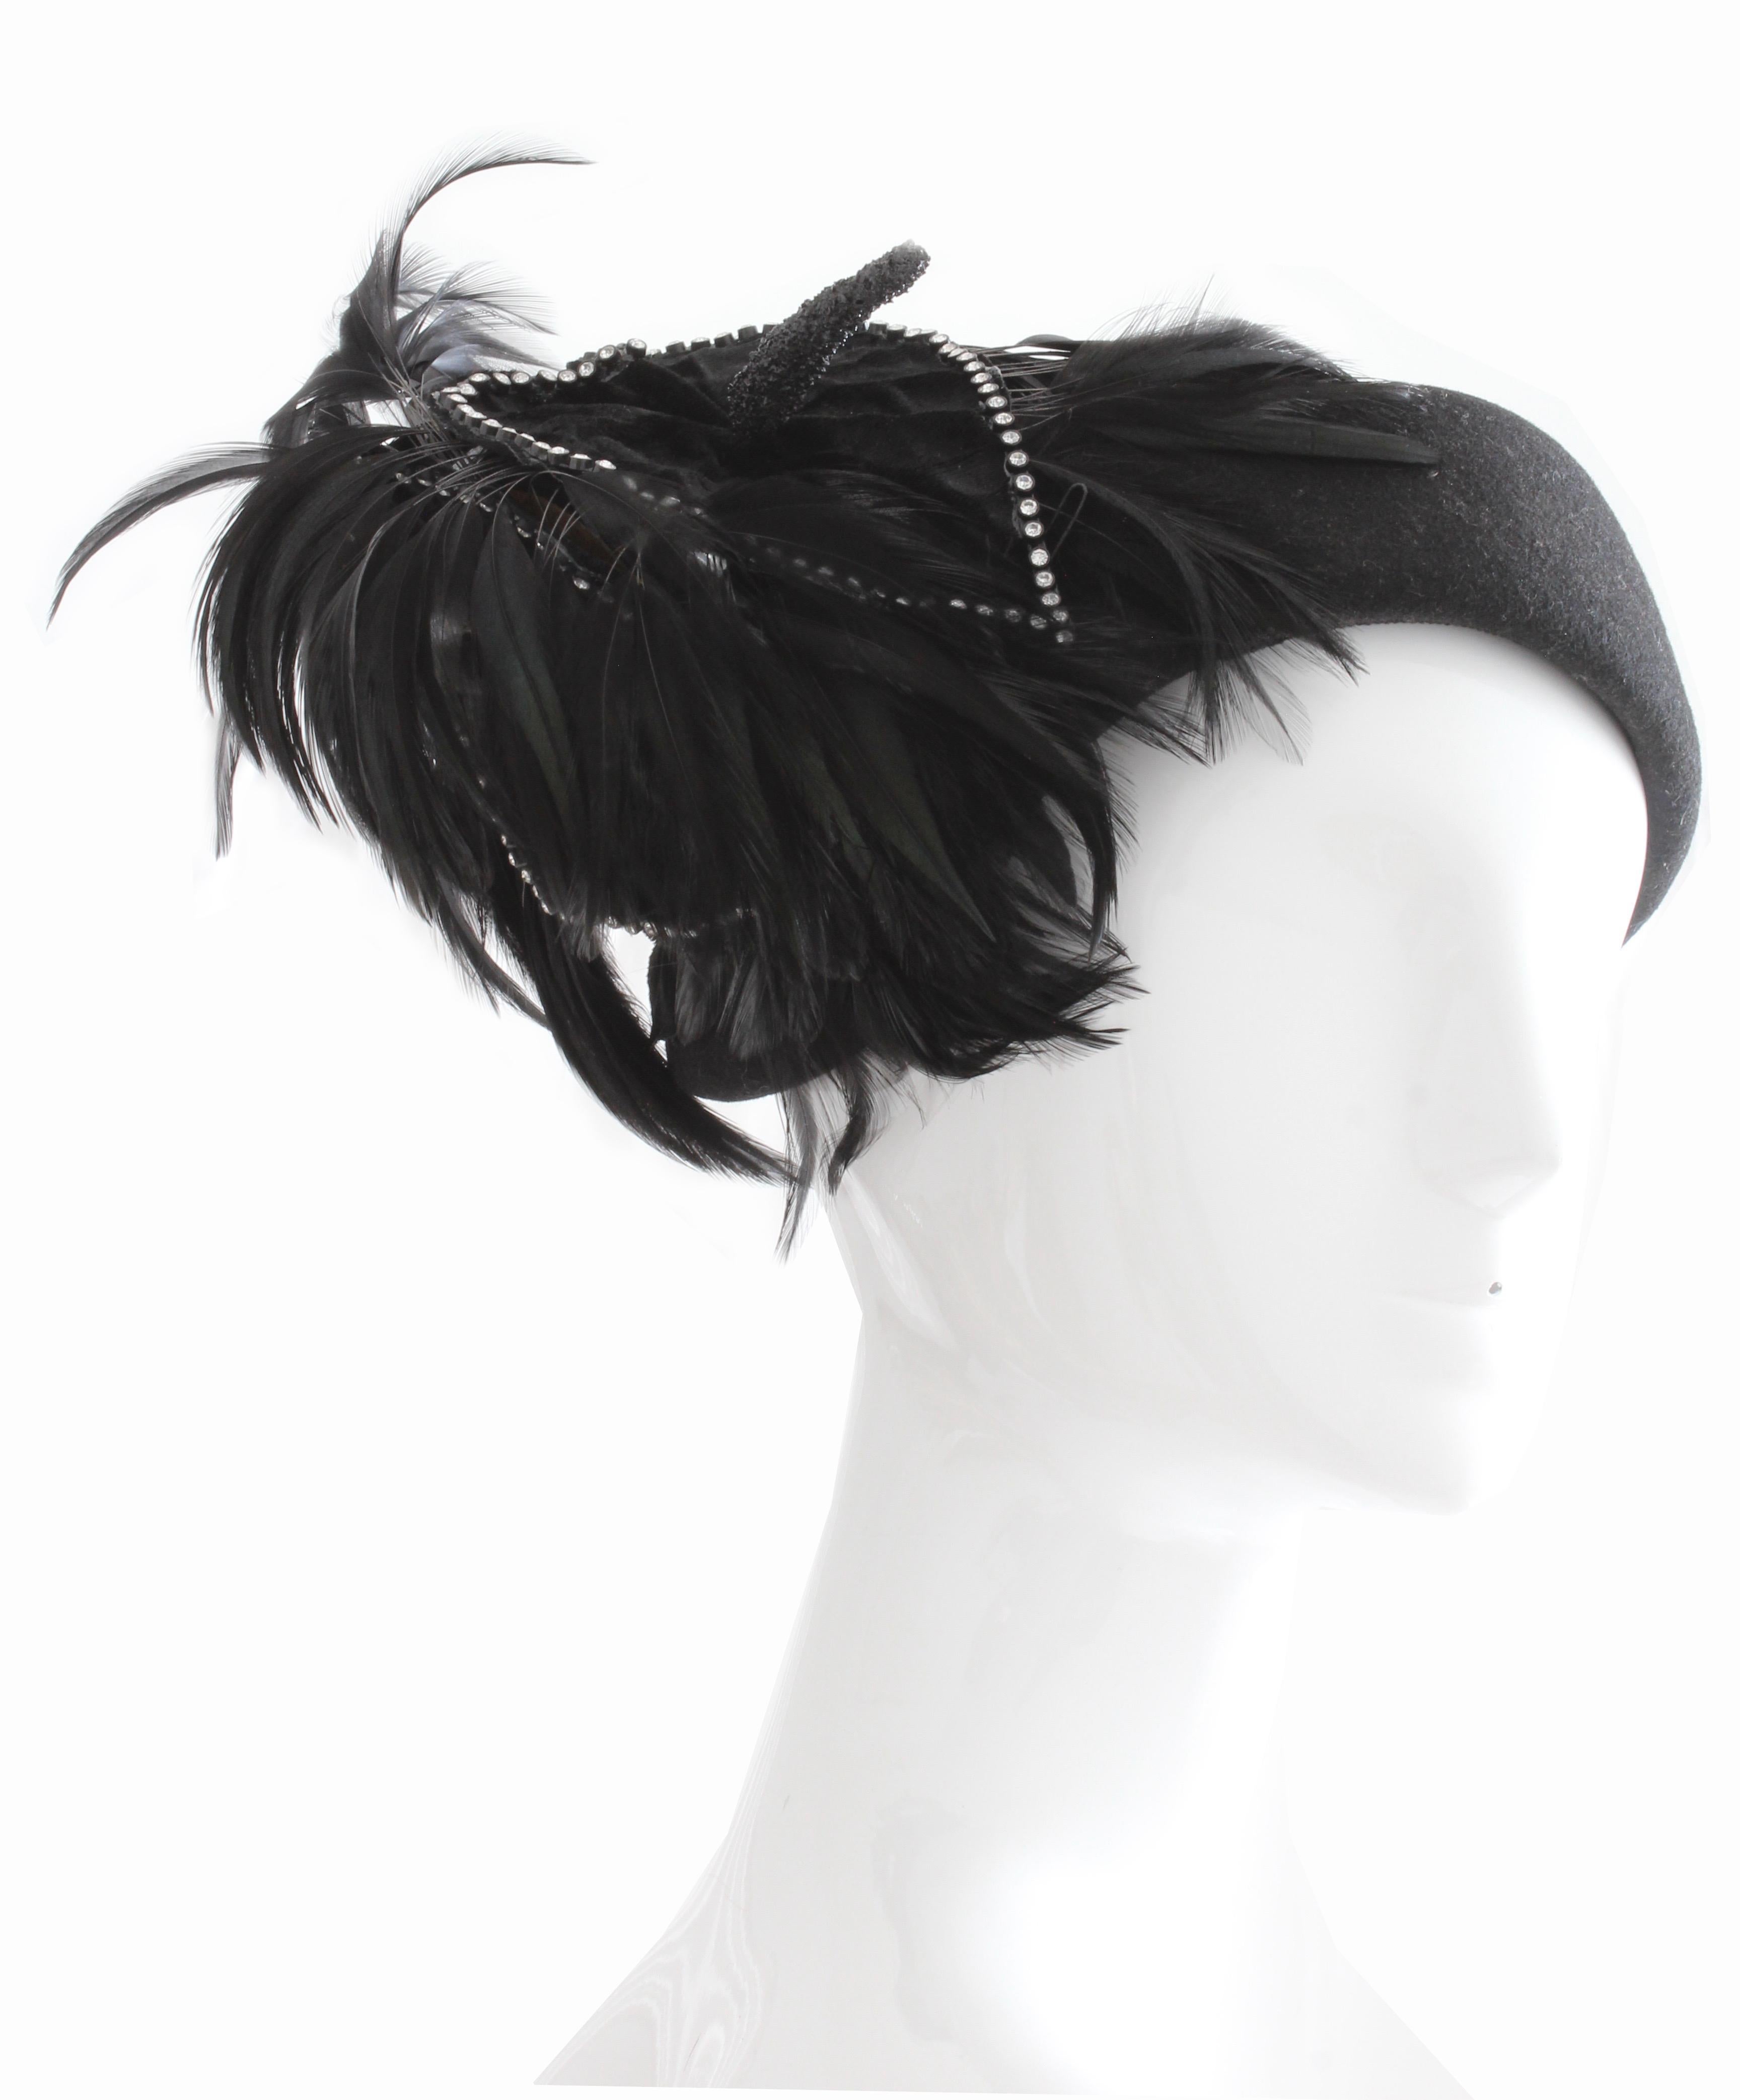 This gorgeous black wool hat with feathers was made by Bollman Hat Co and Jack McConnell Boutique, most likely in the early 60s.  Made from black wool, this piece features a decorative velvet covered floral piece that's outlined in rhinestones with